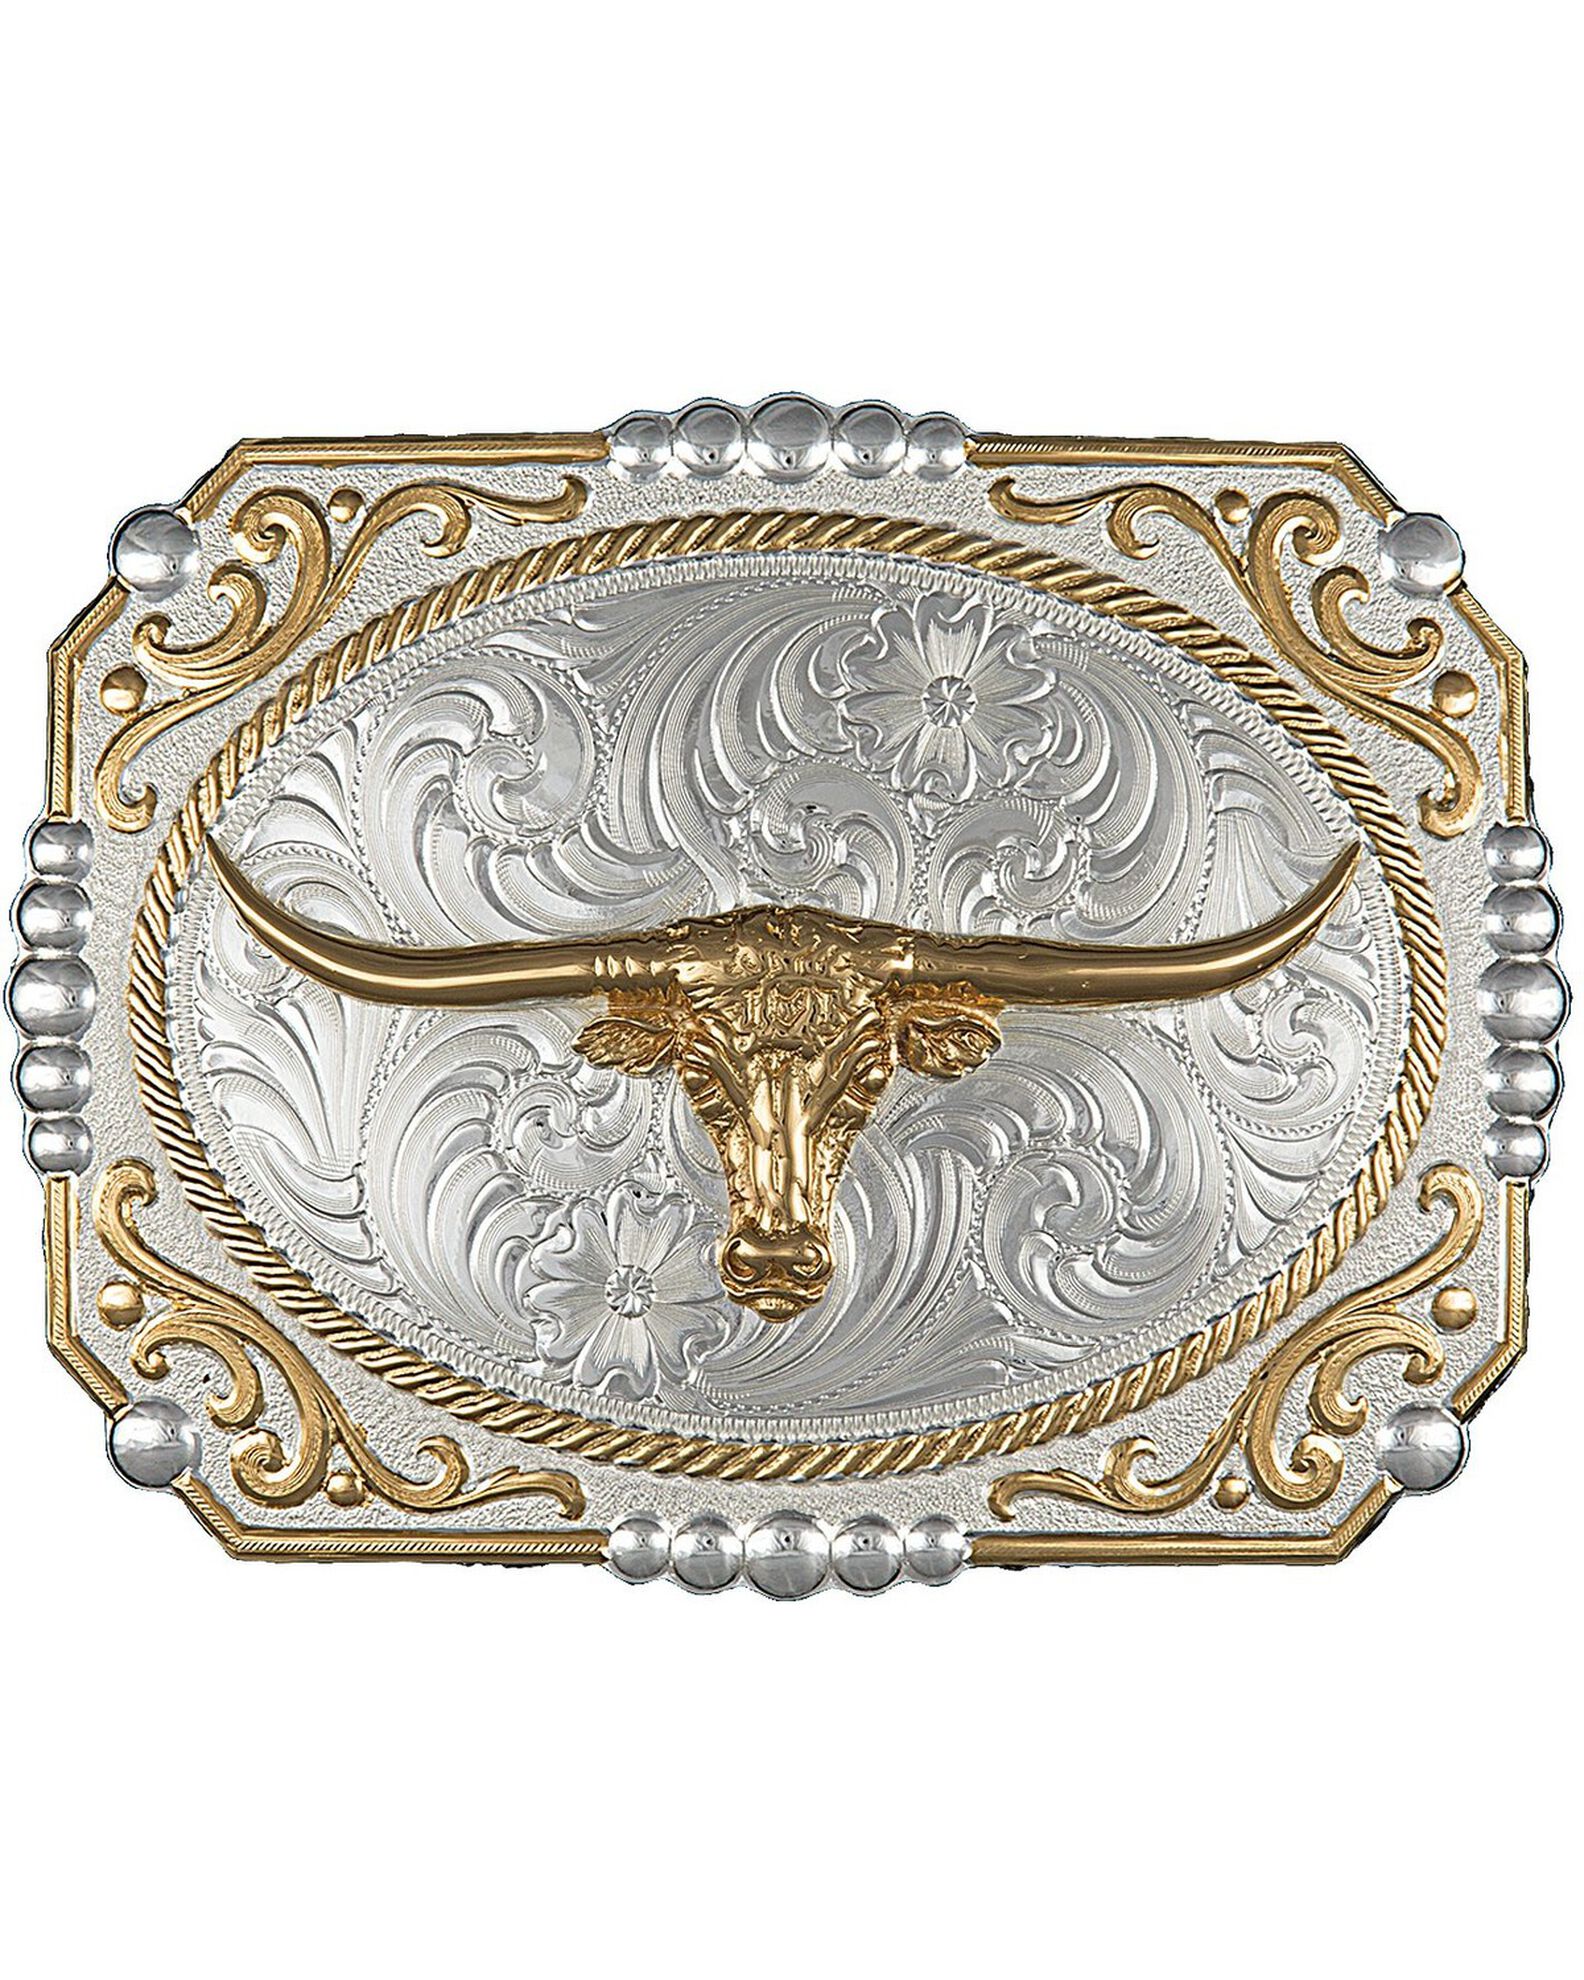 Scully & Scully Sterling Silver Belt Buckle Plaque with Lines